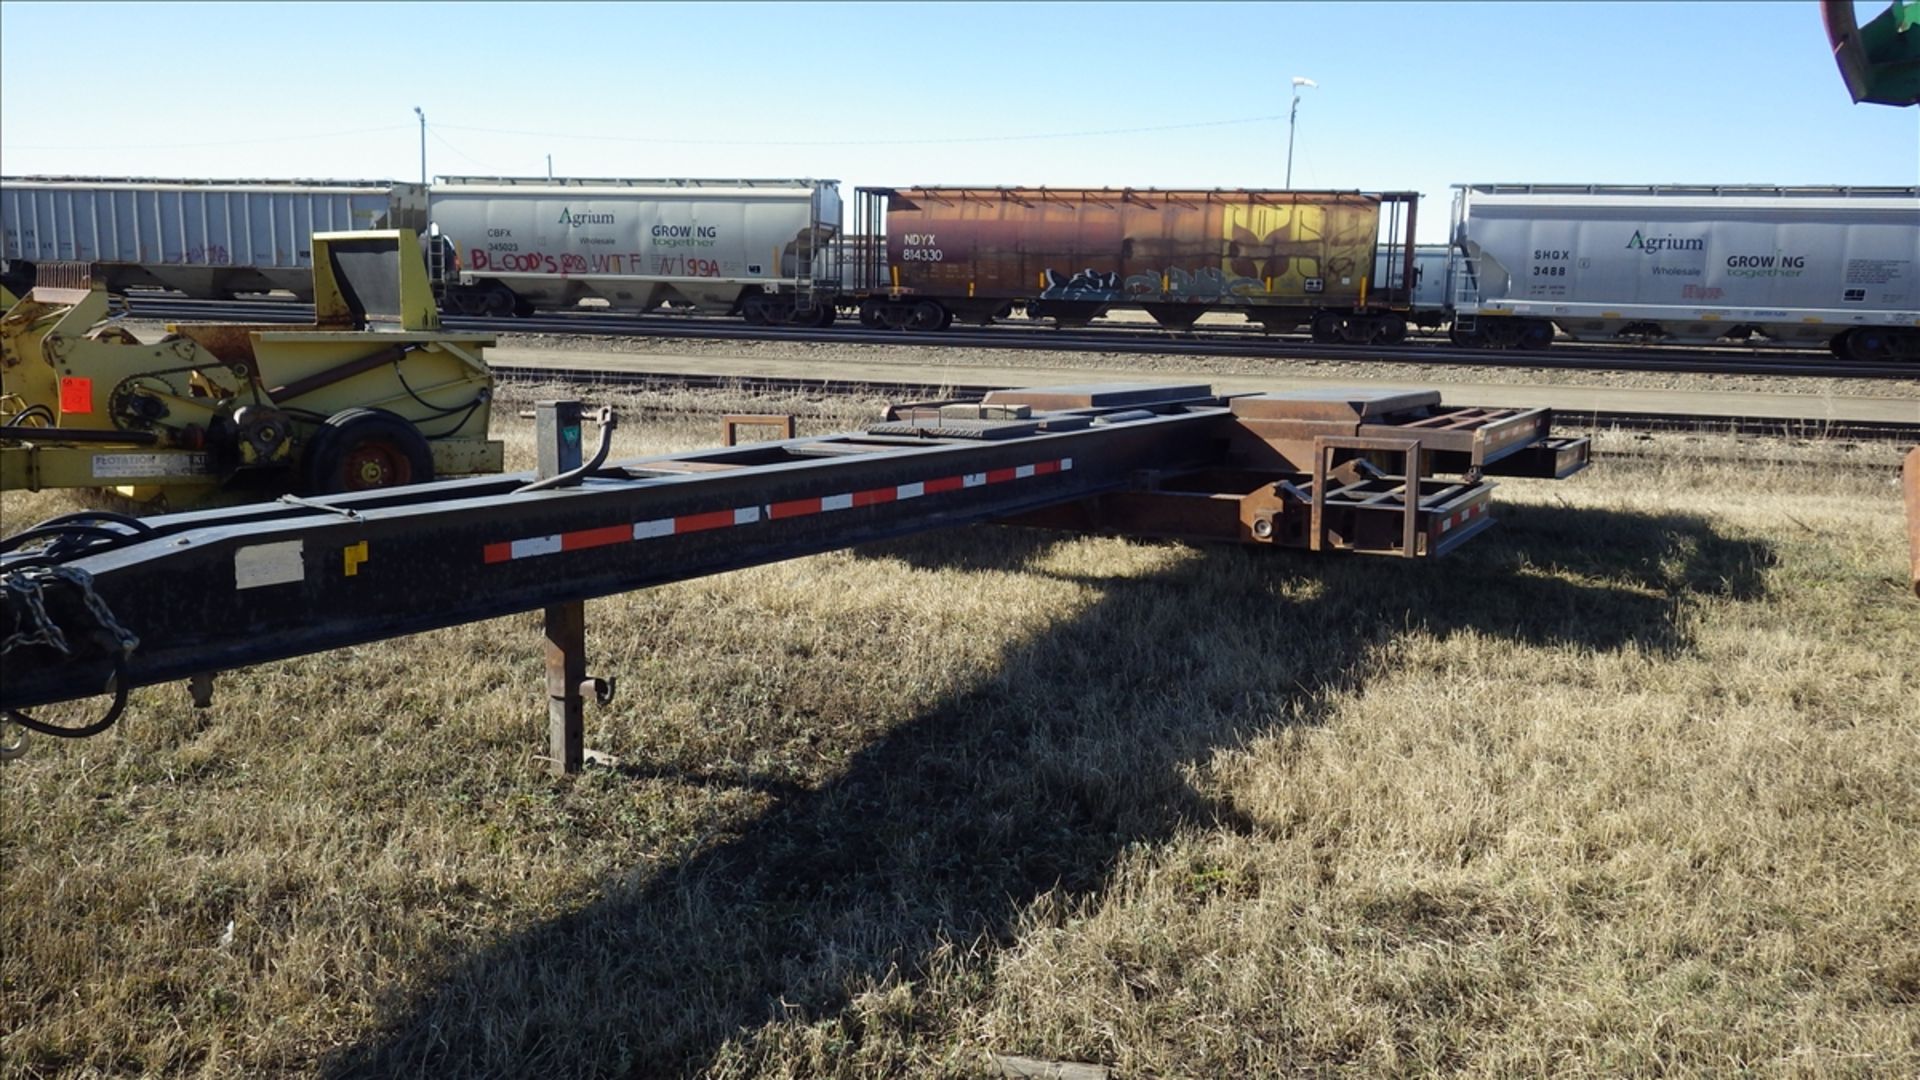 Trailtech Tandem Axle pintle hitch low boy sprayer transport trailer with pintle hitch at rear. Tire - Image 7 of 7